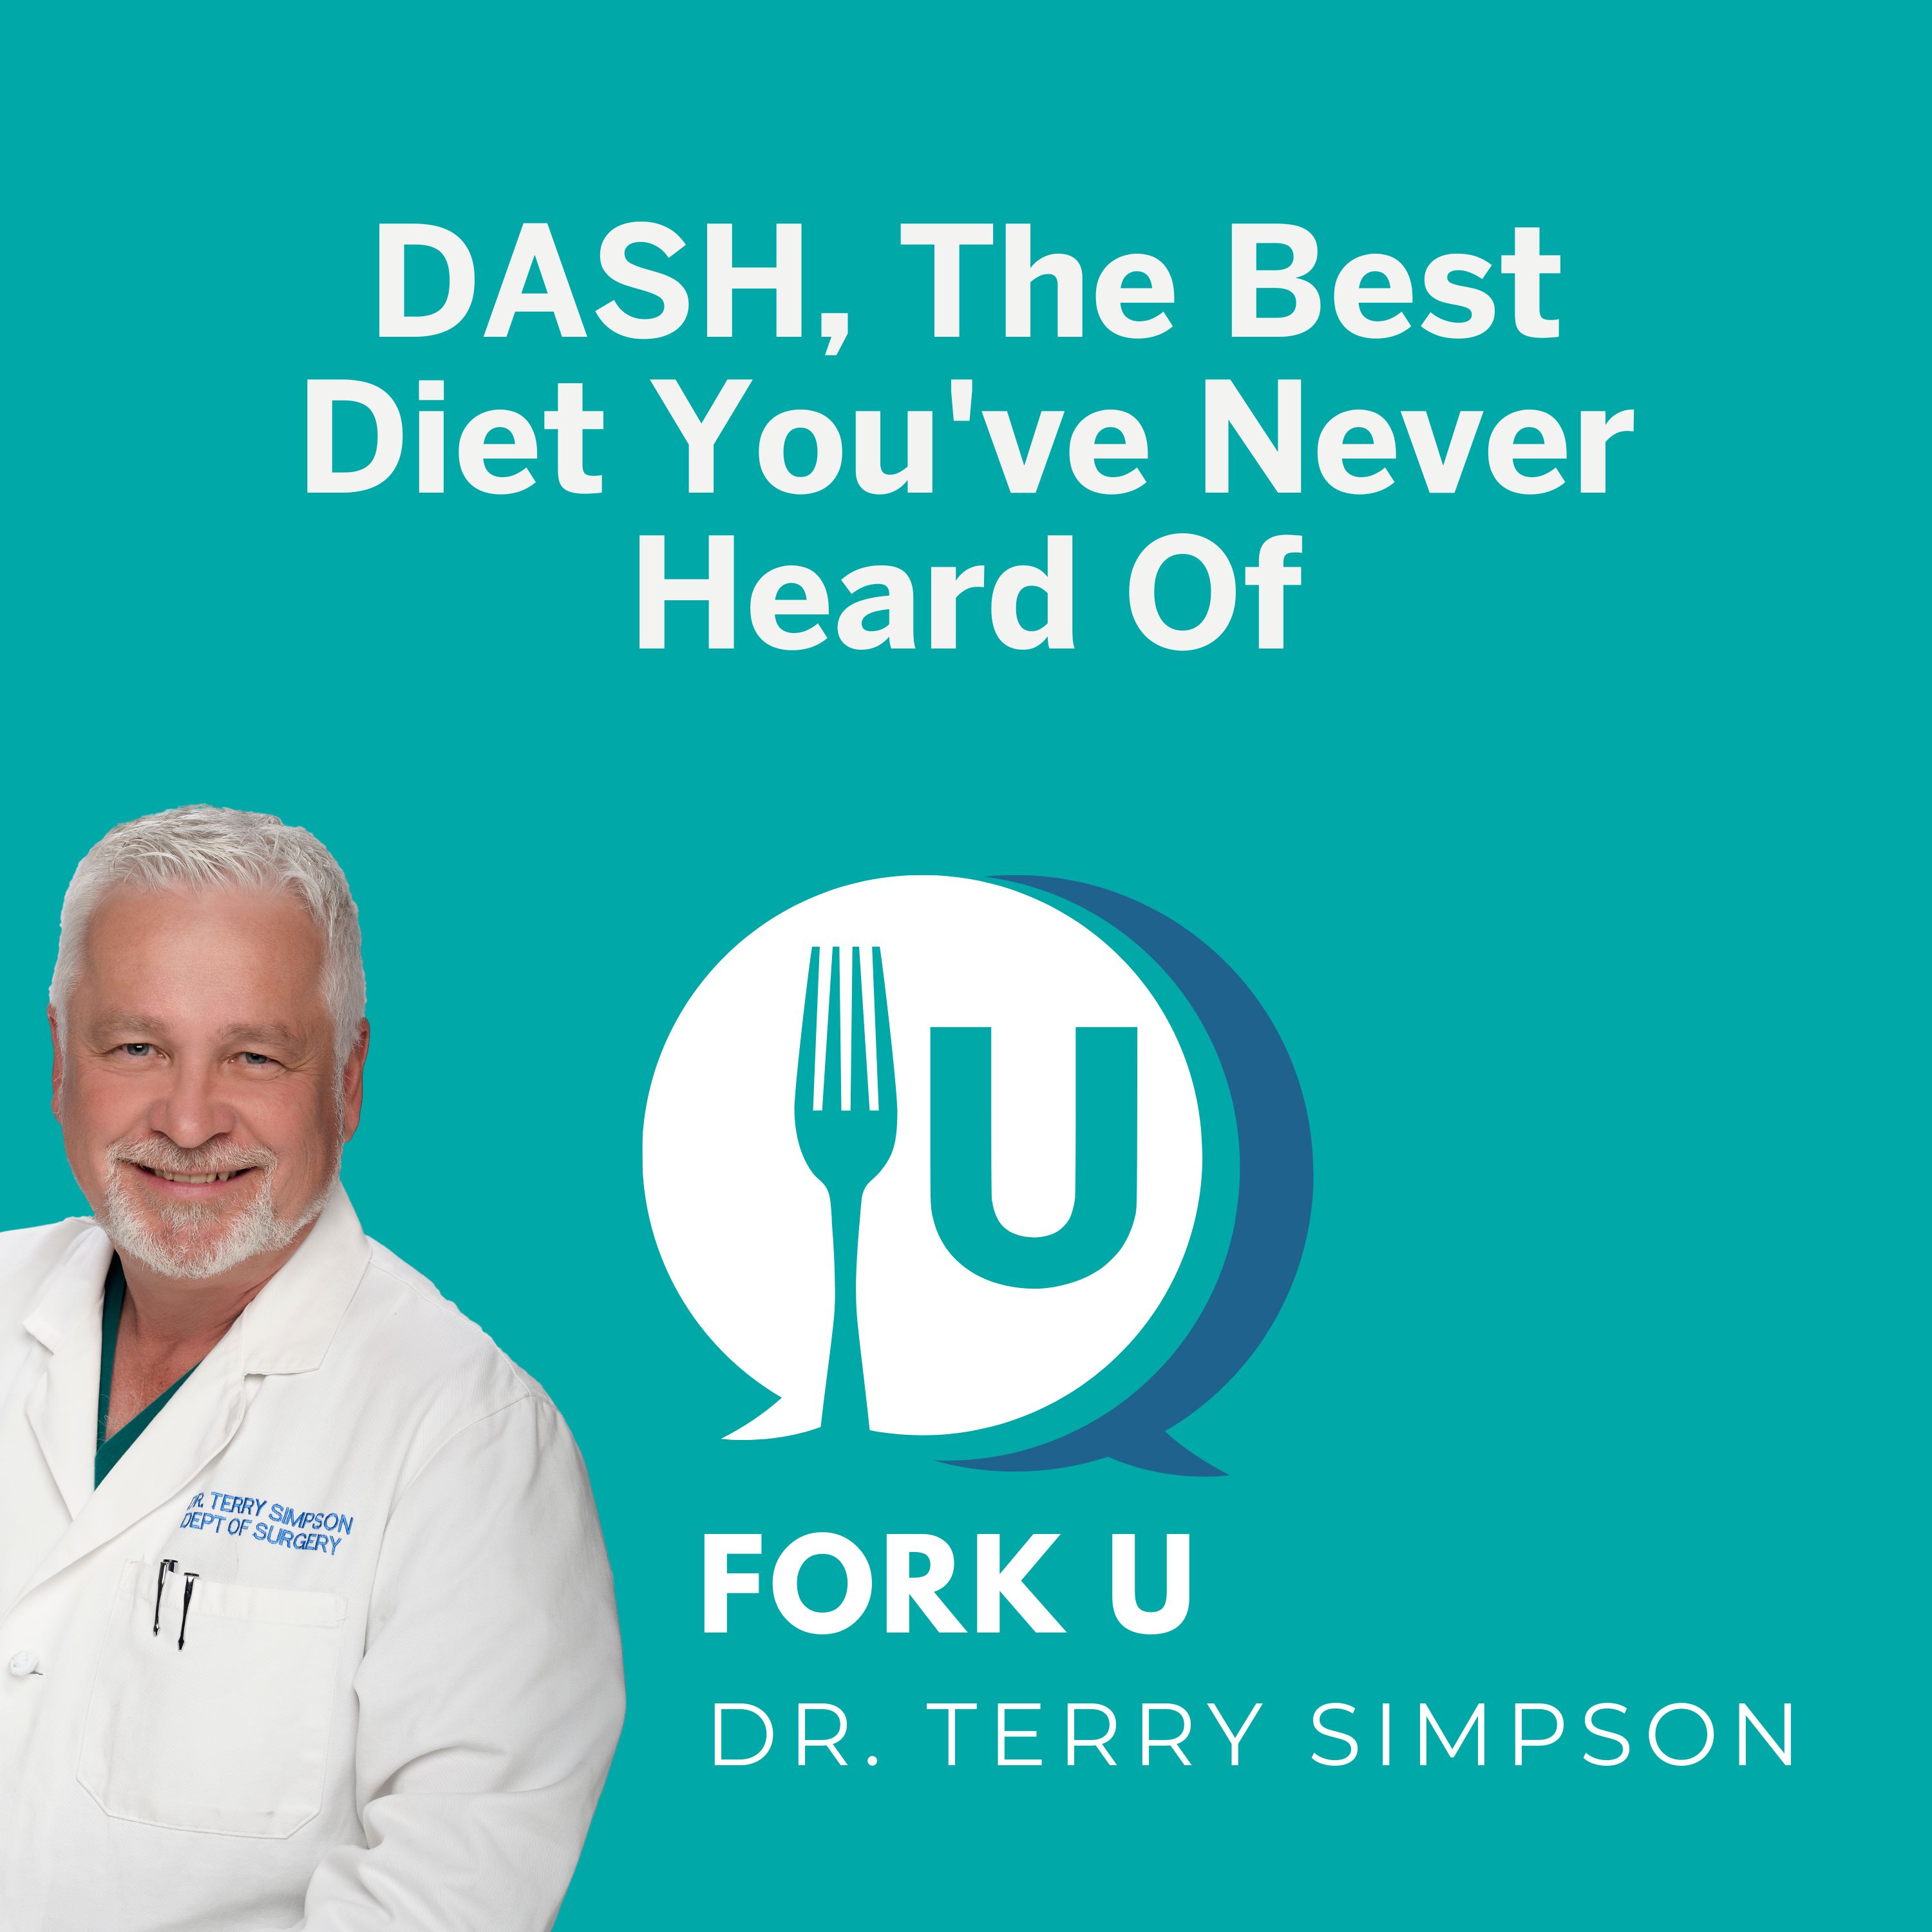 DASH, The Best Diet You’ve Never Heard Of